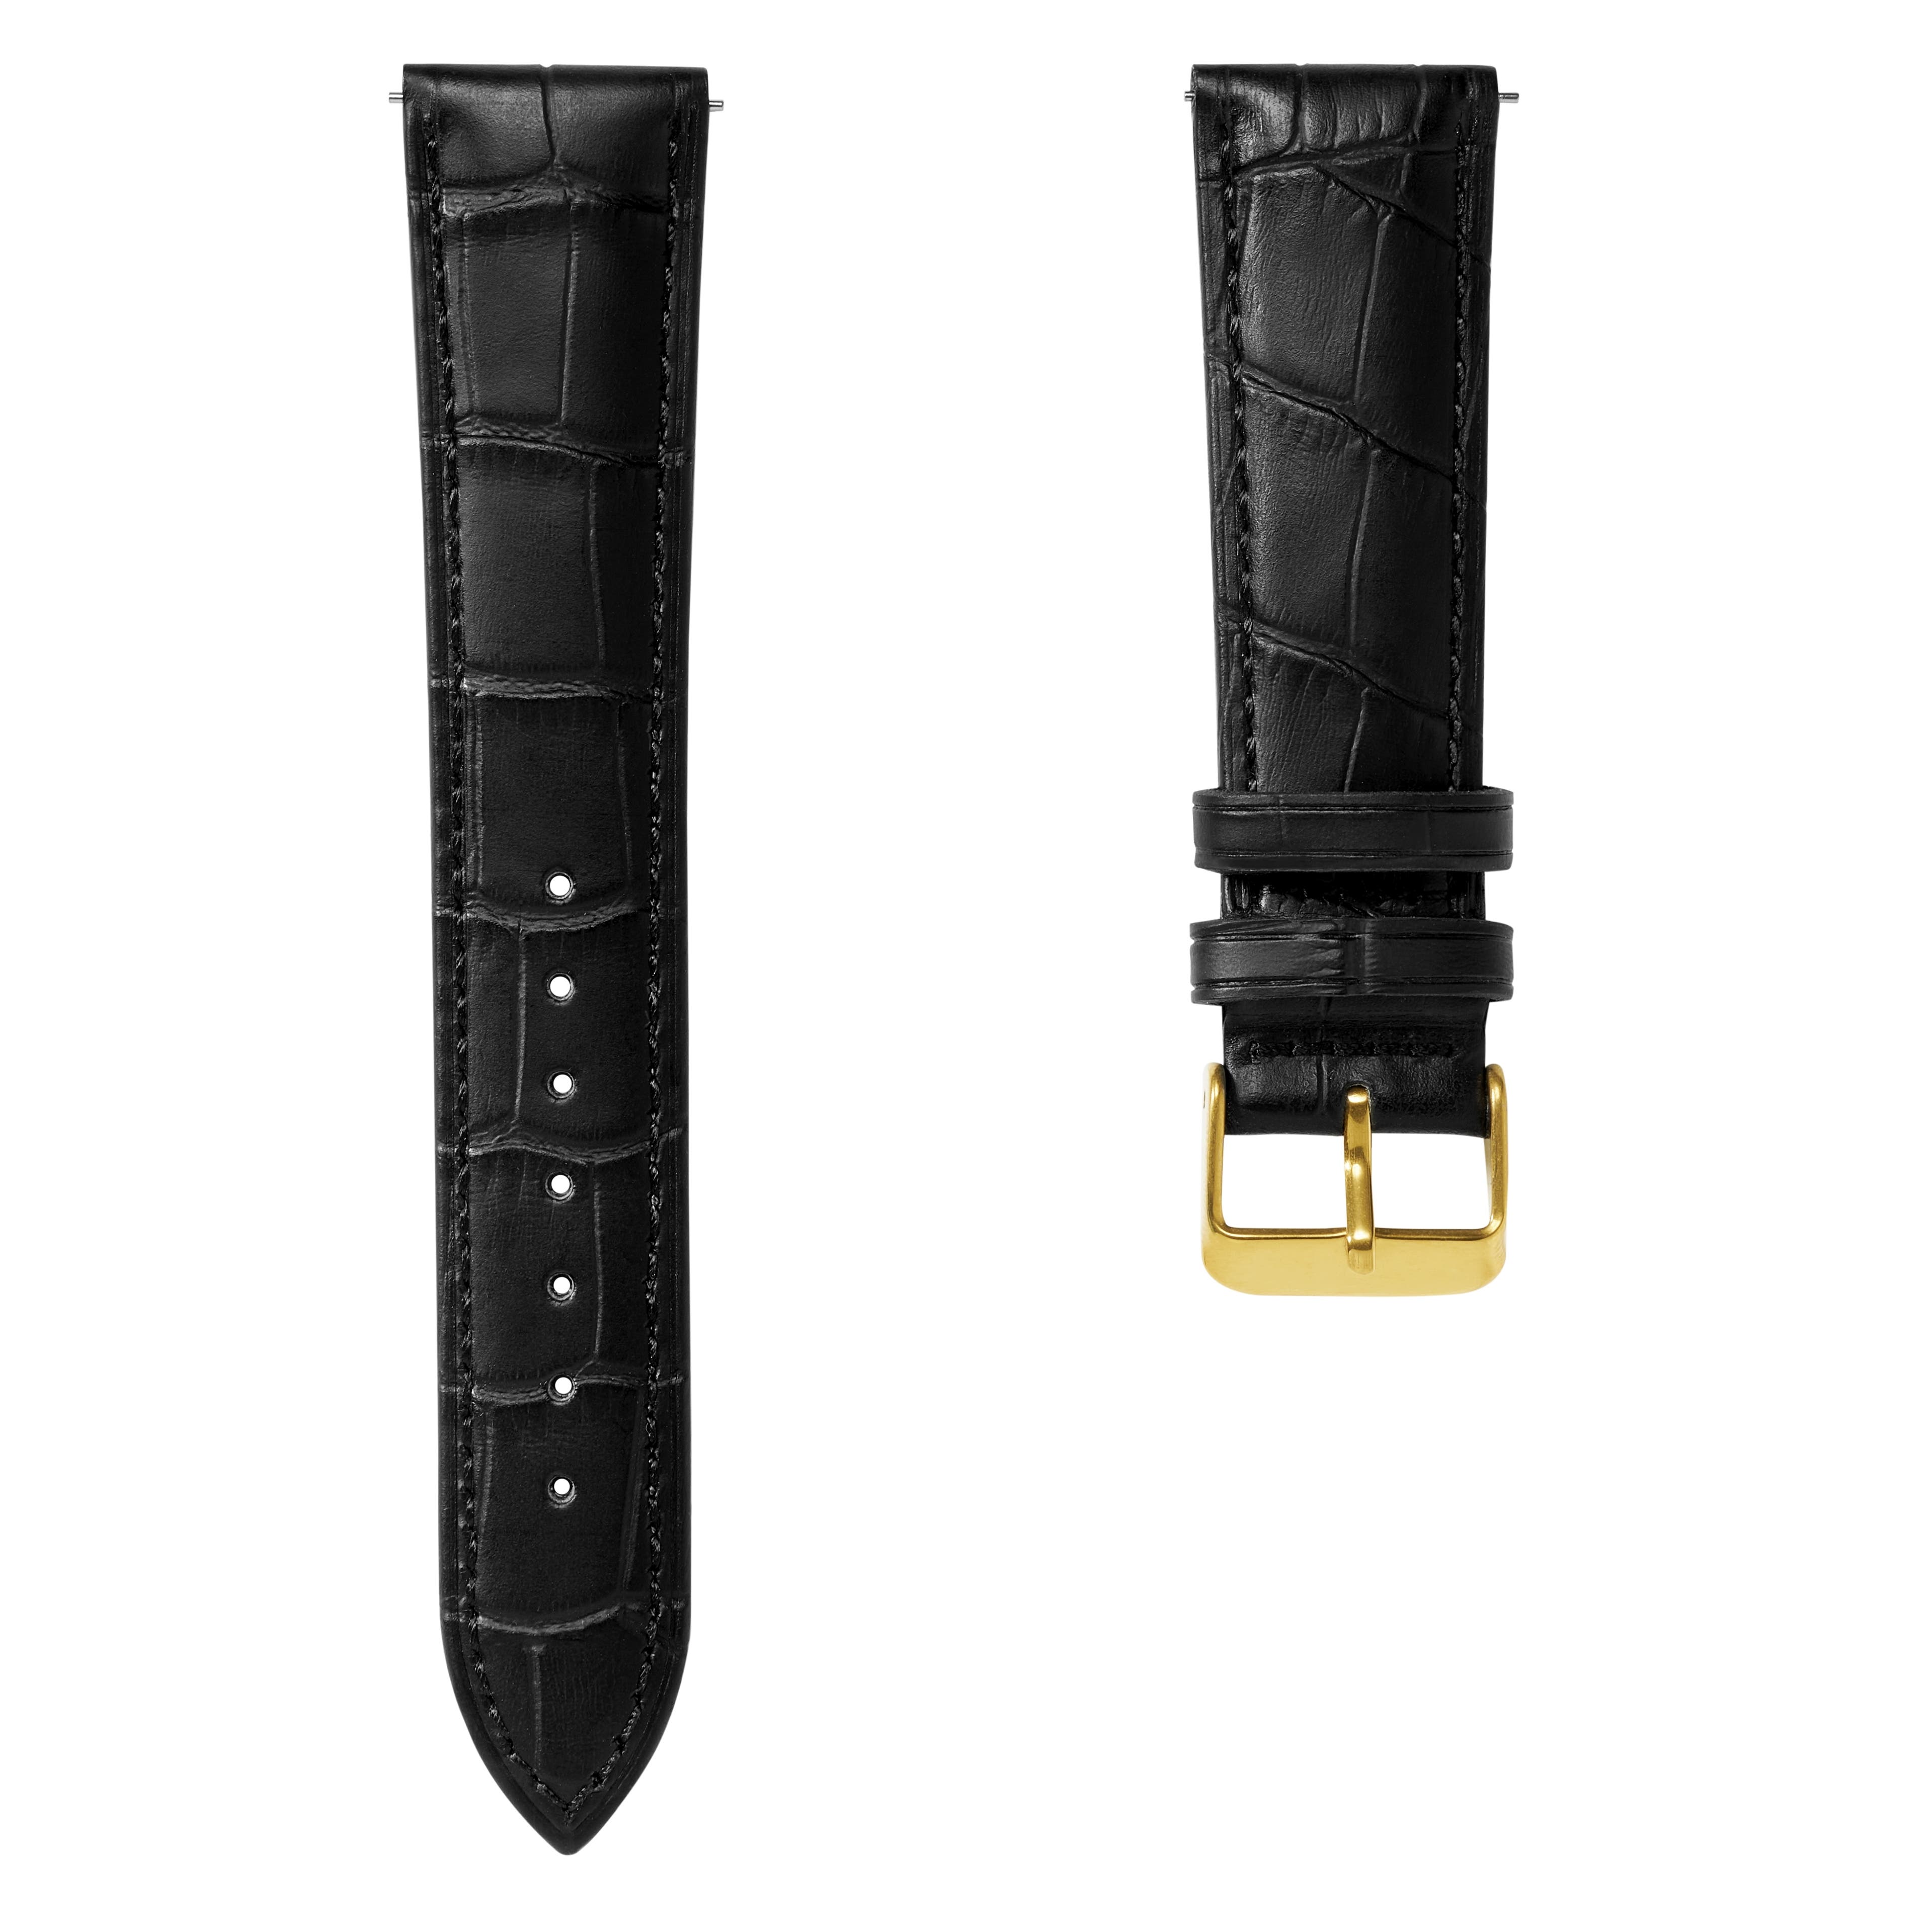 22 mm Crocodile-Embossed Black Leather Watch Strap with Gold-Tone Buckle – Quick Release